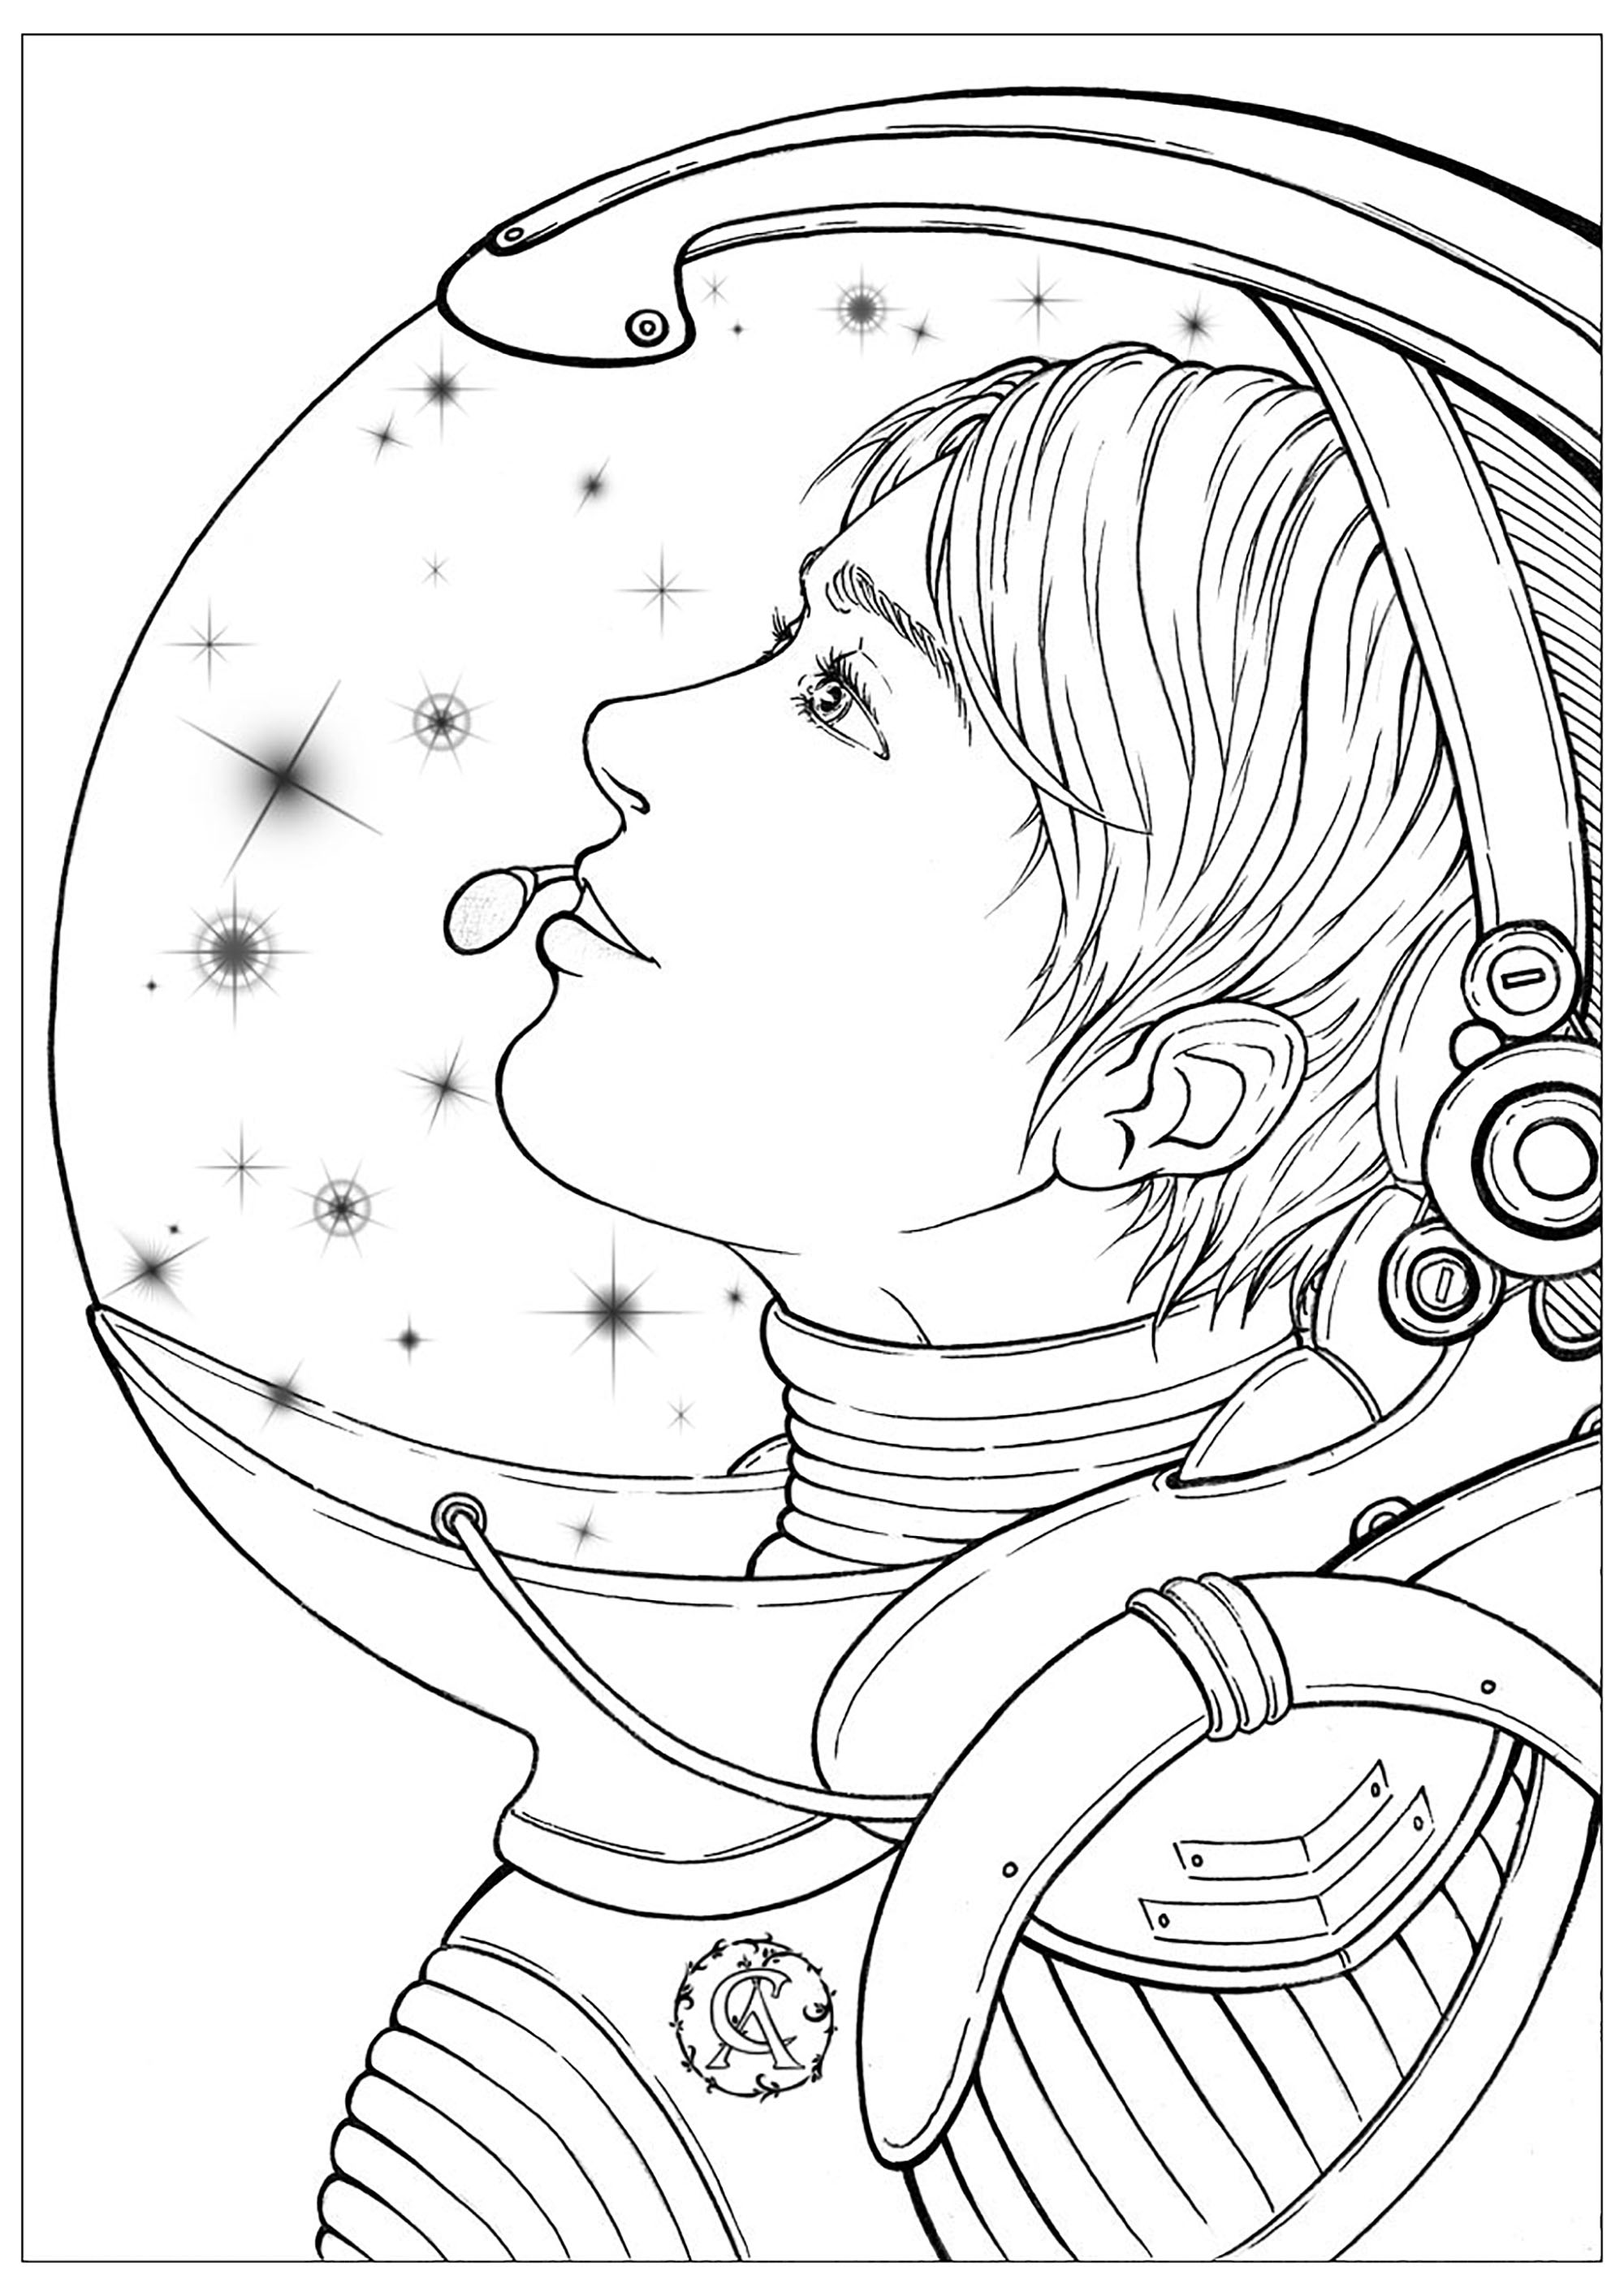 This astronaut in a spacesuit dreams of the stars she'll be exploring. This coloring page is an invitation to dream and escape to the stars. It shows an astronaut in profile, dressed in a space suit, contemplating the starry sky. Strangely enough, the stars are in her helmet!Her eyes sparkle with wonder and dreams, and she's already imagining the adventures that await her in space. She's ready to set off and discover the wonders hidden in the universe, Artist : Asantassi